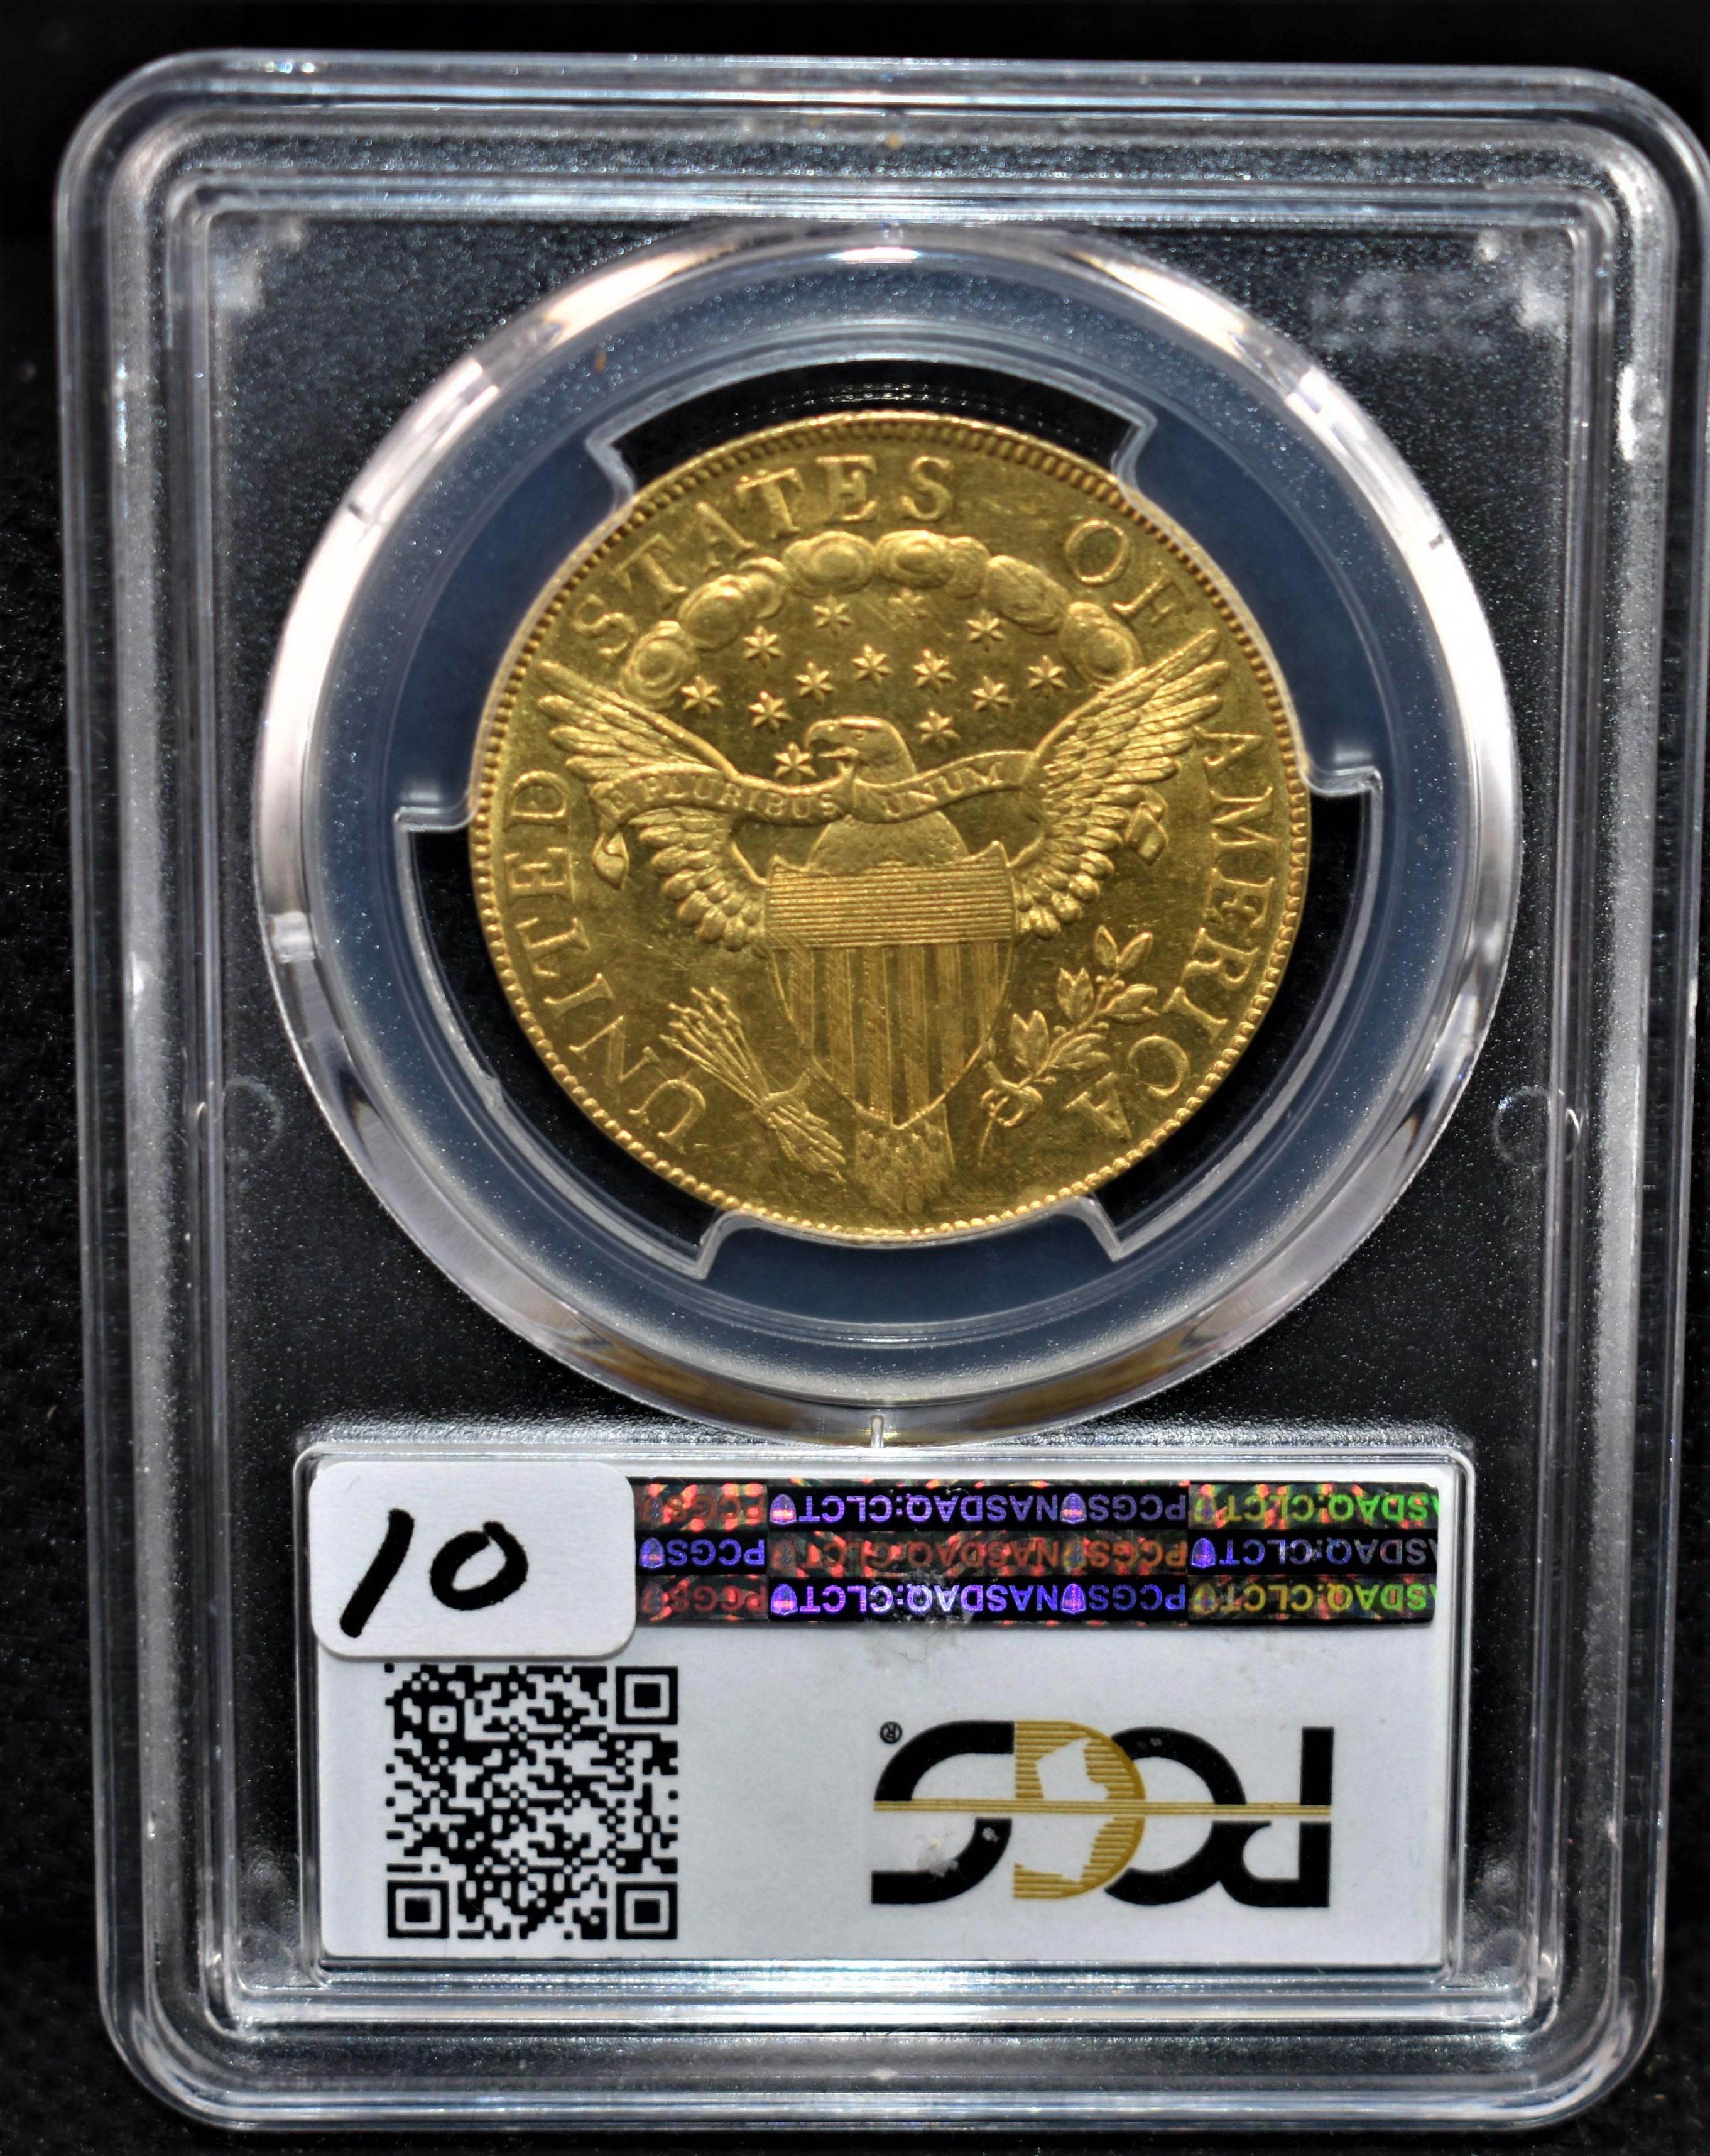 RARE KEY 1801 DRAPED BUST $10 GOLD COIN -PCGS MS62